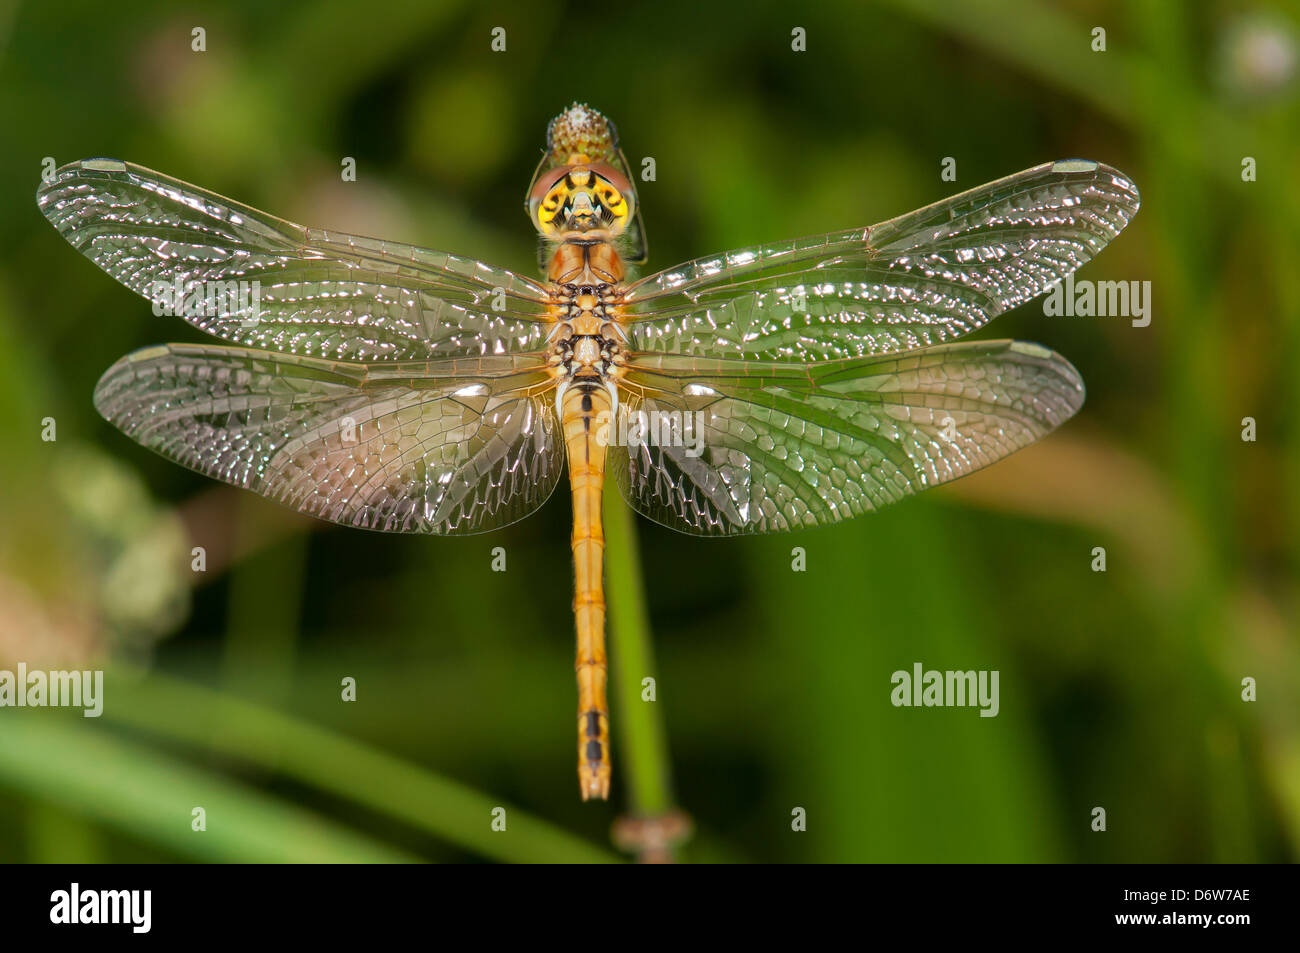 Dragonfly with shining wings, Upper view Stock Photo